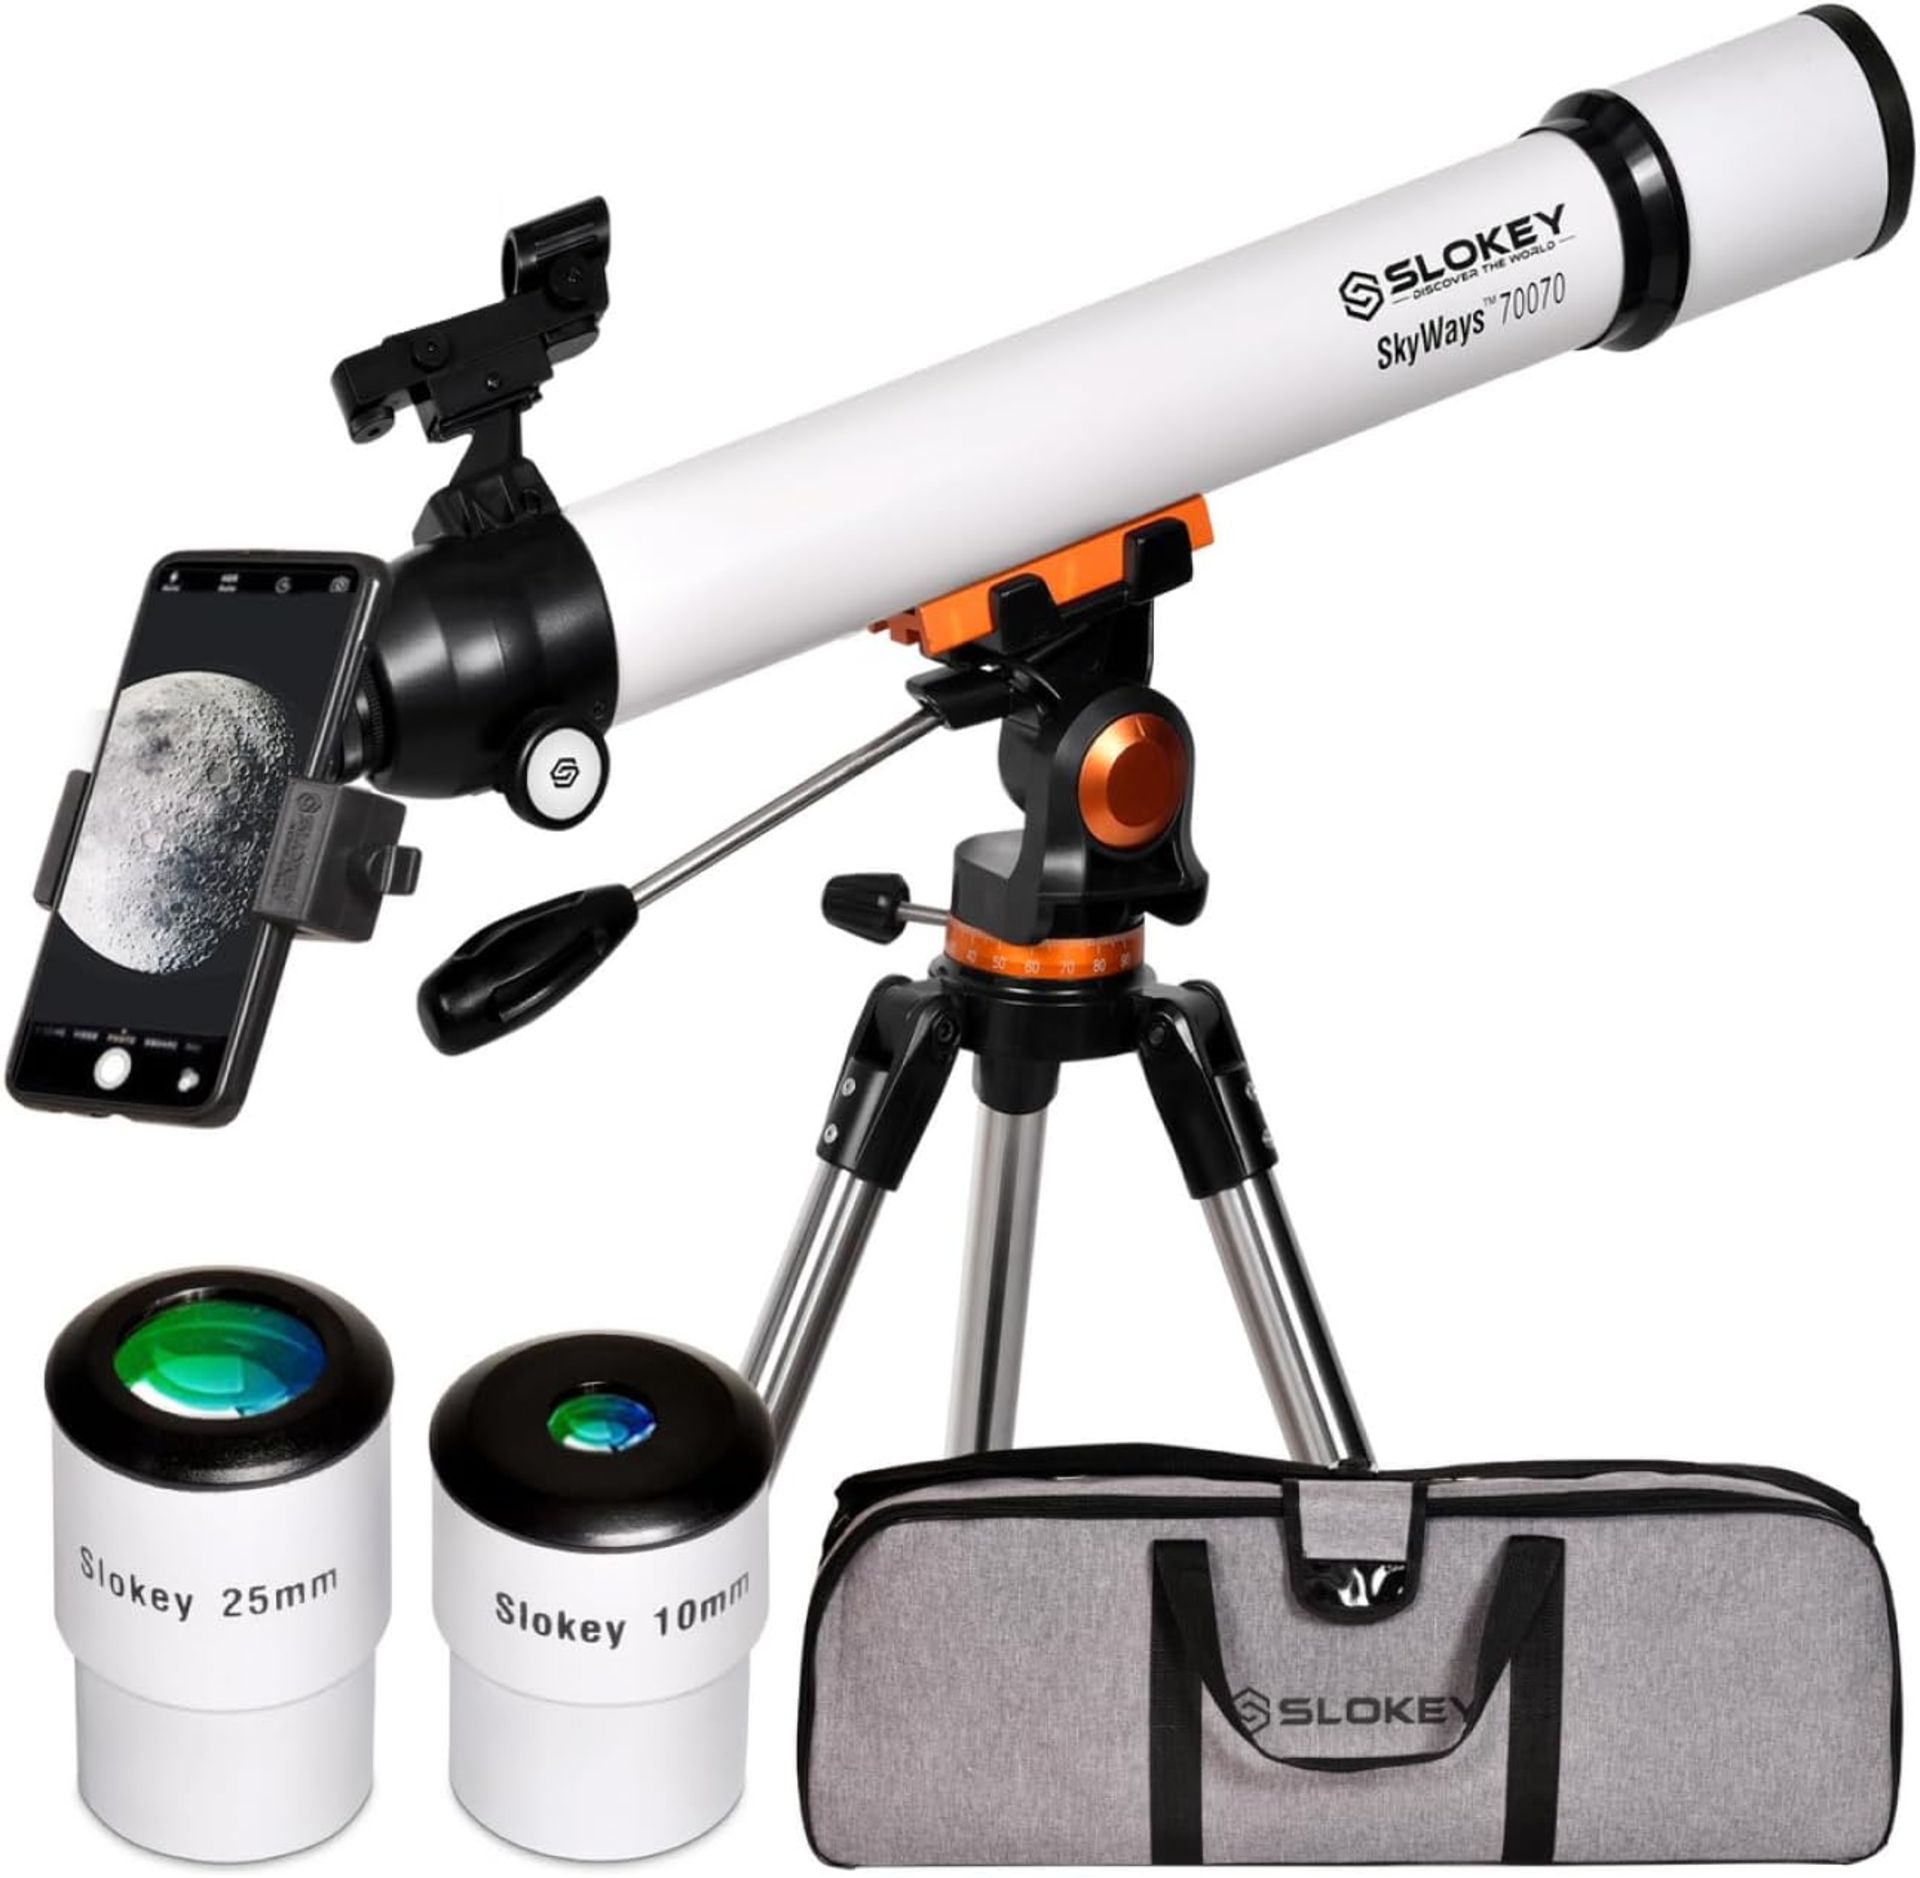 1X SLOKEY 70070 SKYWAYS TELESCOPE FOR ASTRONOMY WITH ACCESSORIES (NEW) - AMAZON RRP £159.99 - Image 2 of 11